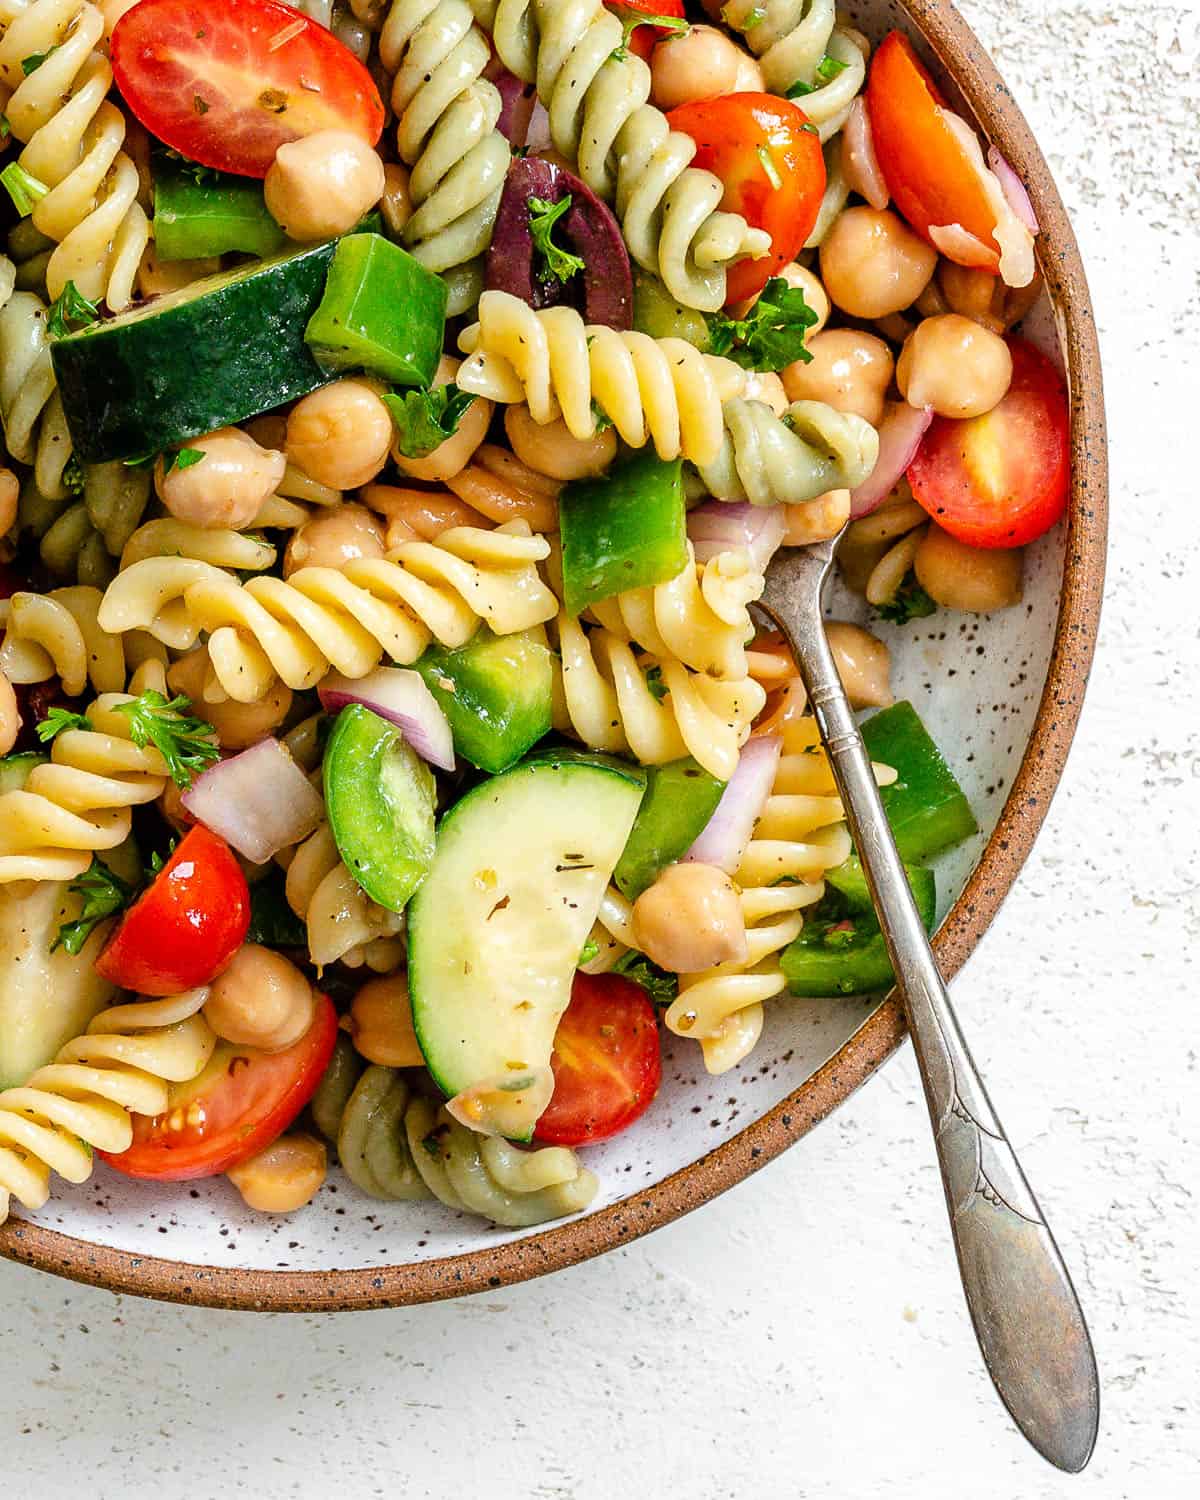 completed Mediterranean Vegan Pasta Salad plated against a white surface